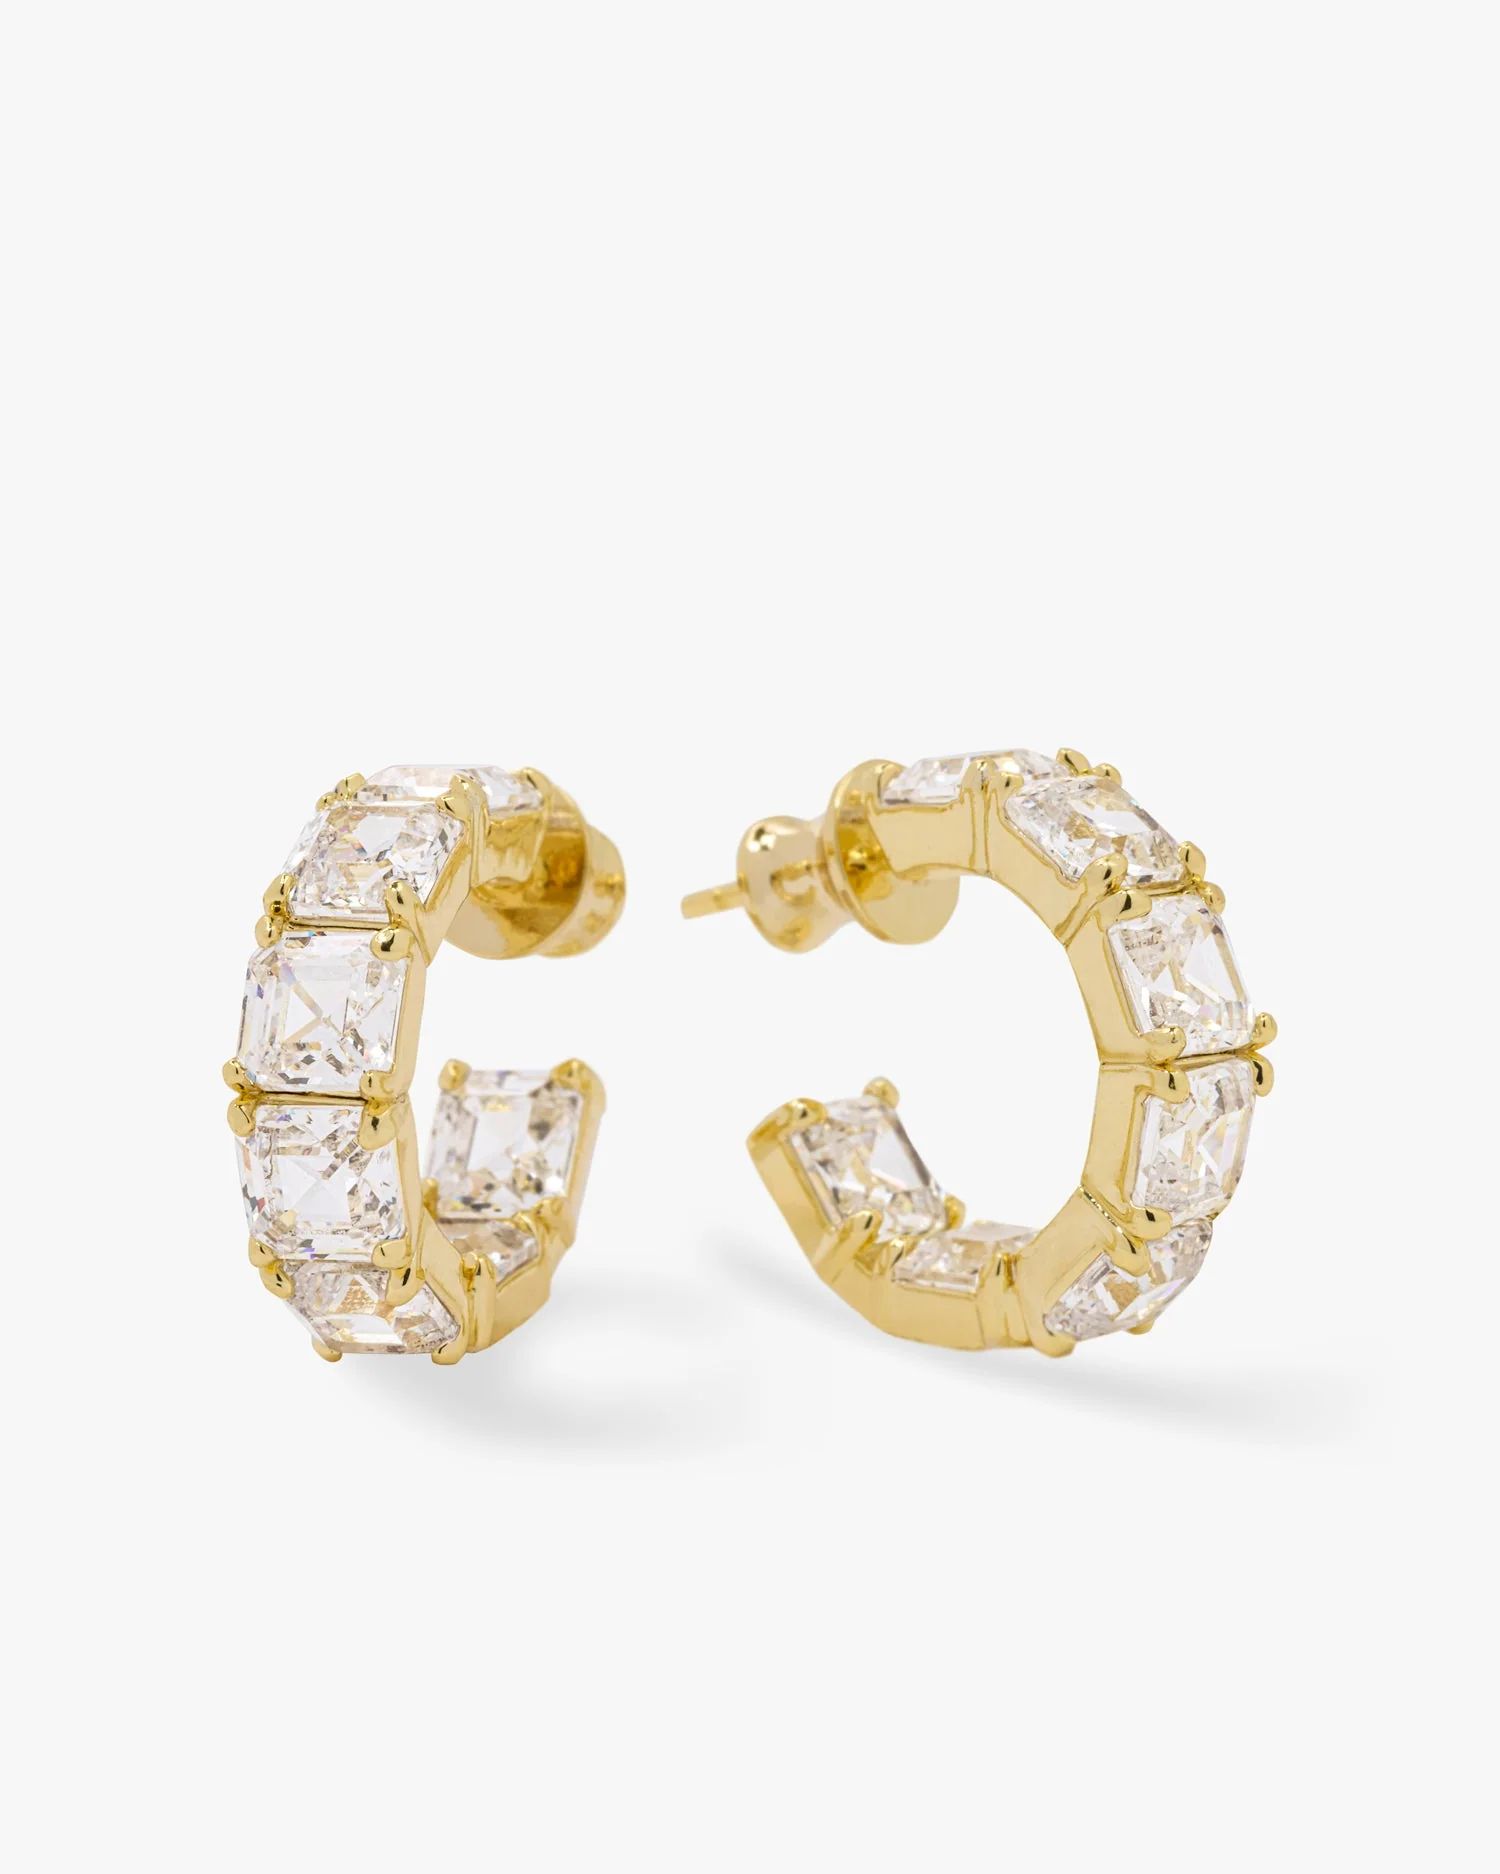 The Queens Hoops .75" - Gold|White Diamondettes | Melinda Maria